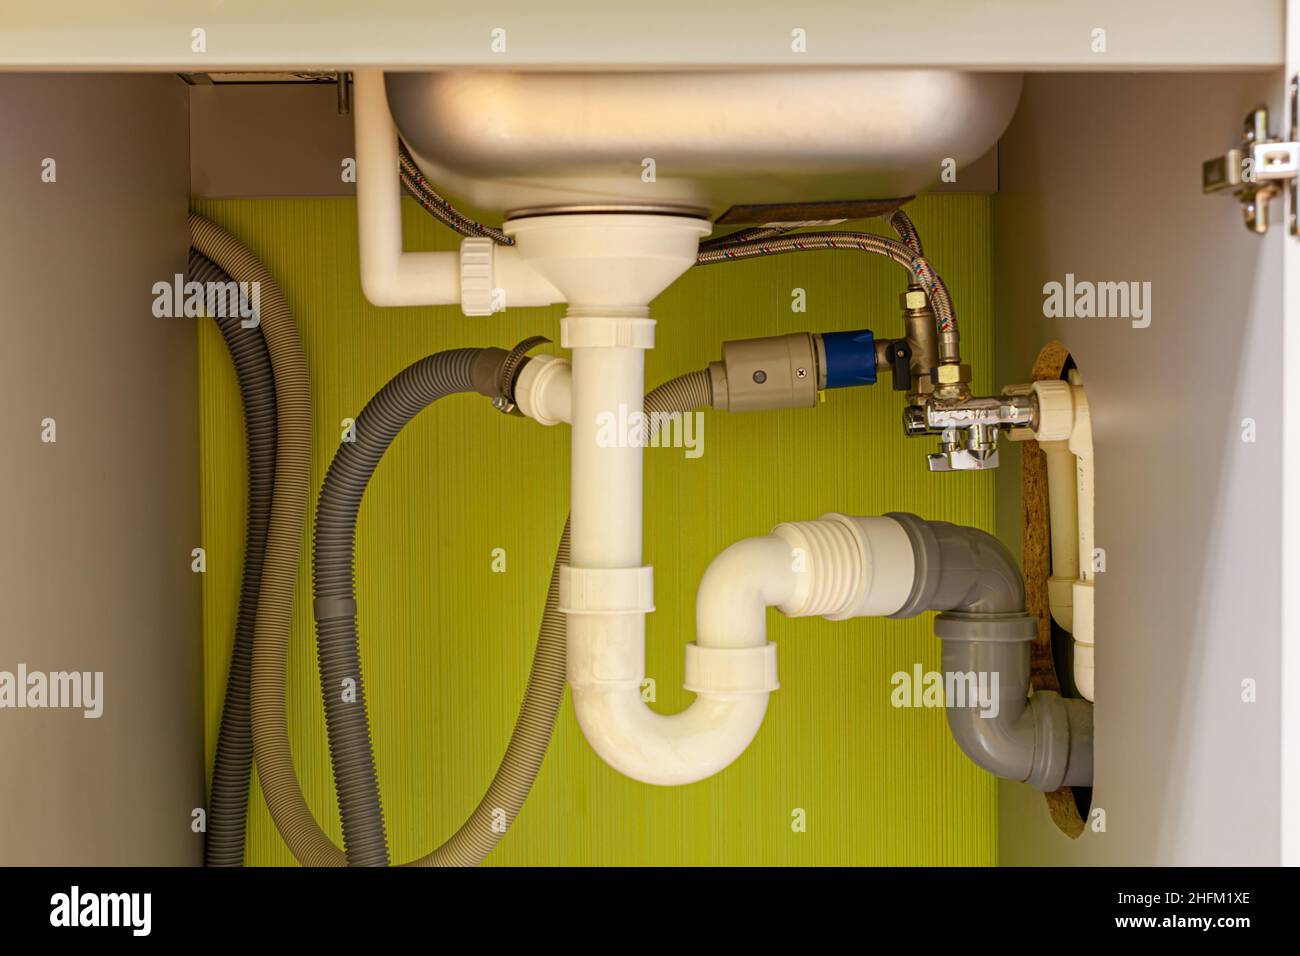 configuring drain pipes under kitchen sink to save space